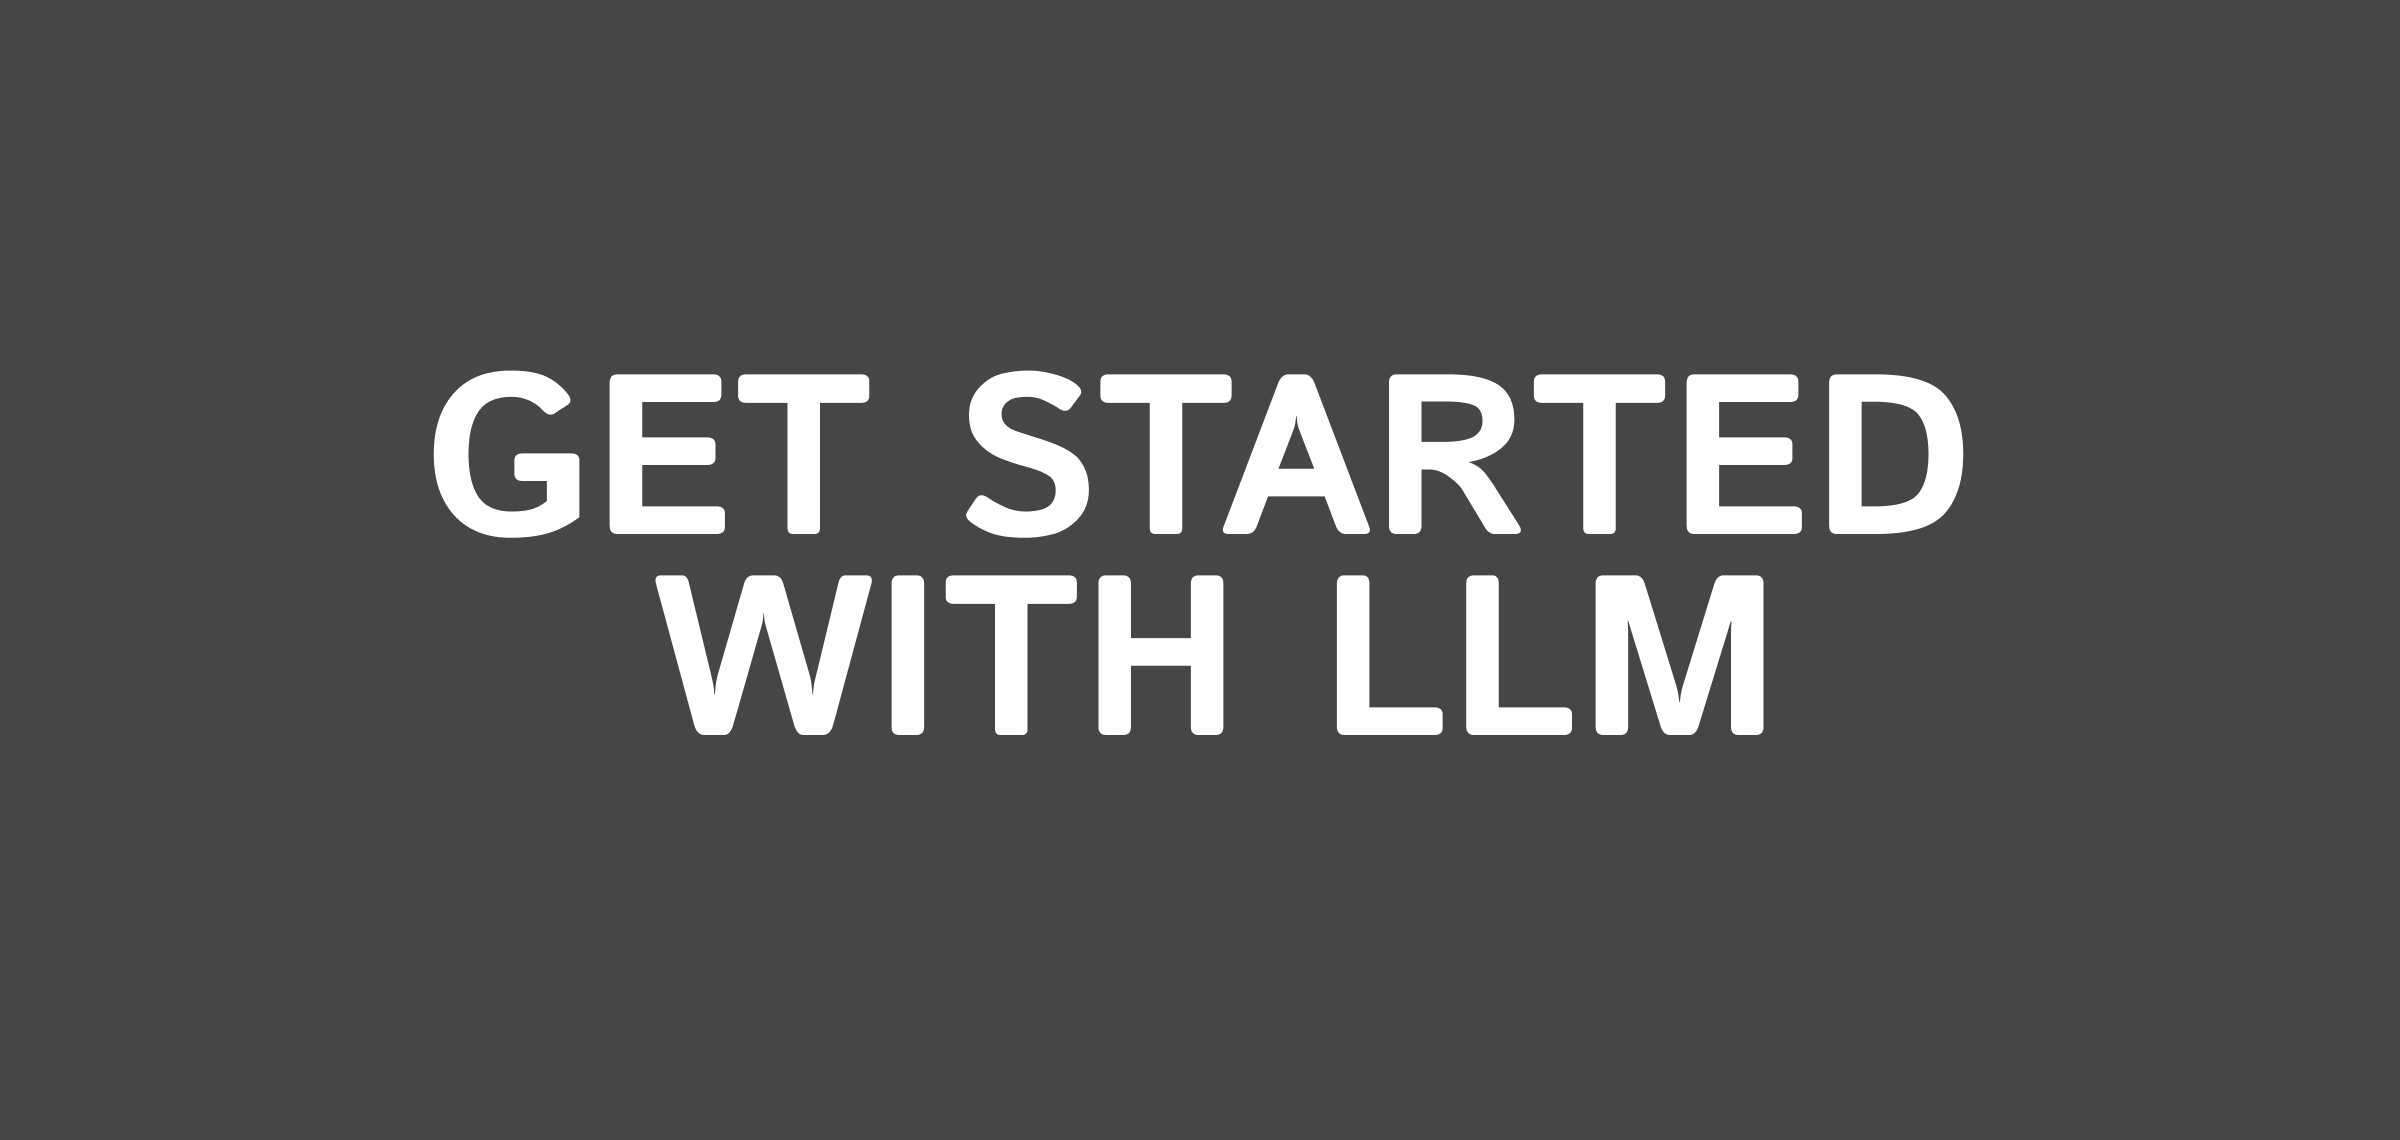 Get started with LLM